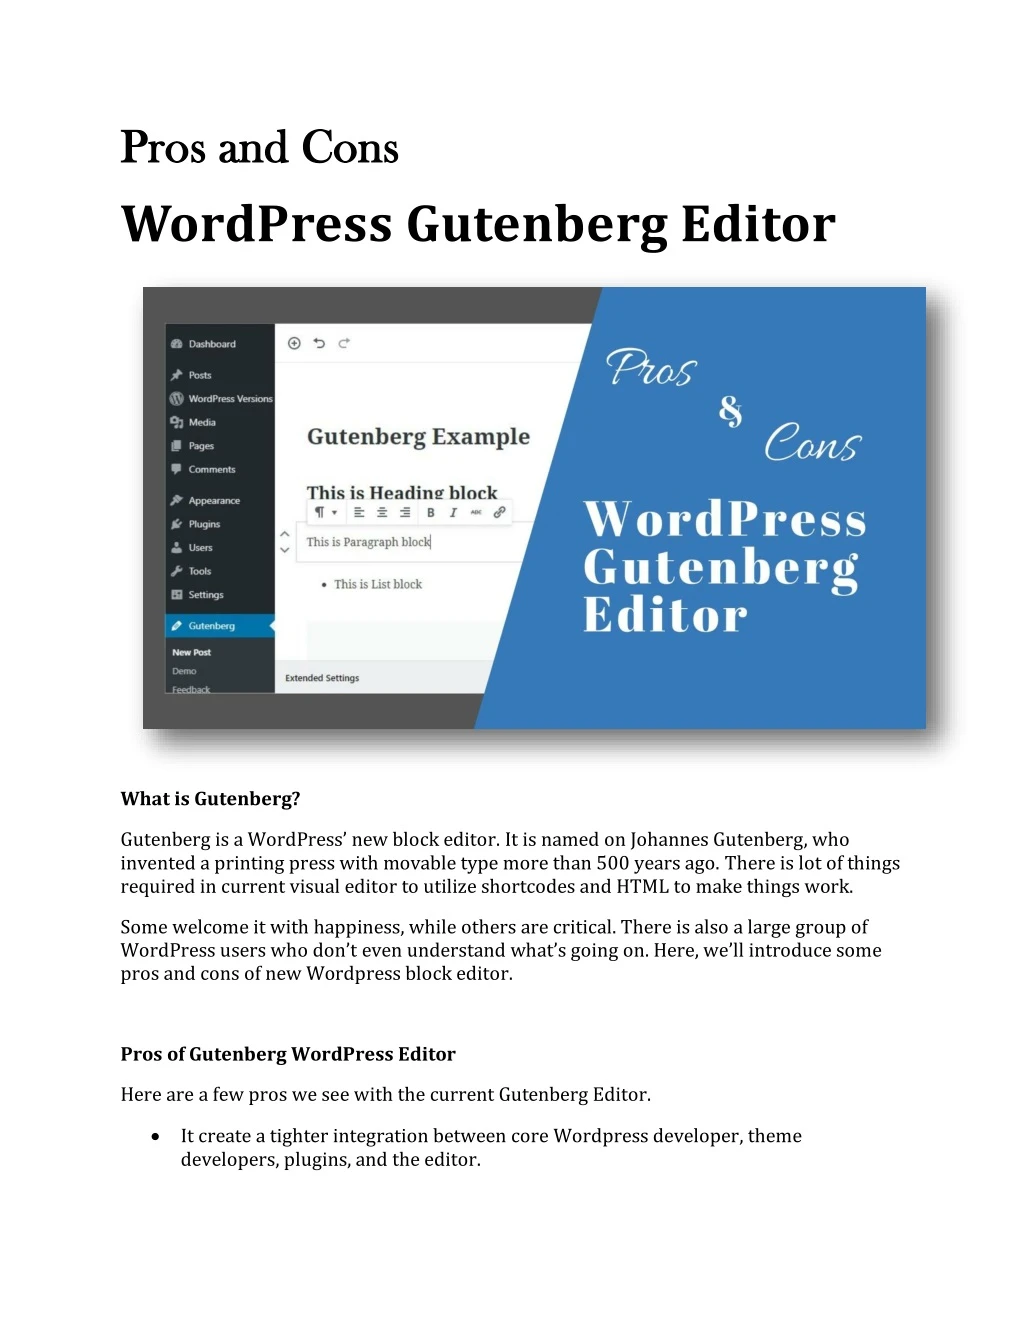 pros and cons pros and cons wordpress gutenberg